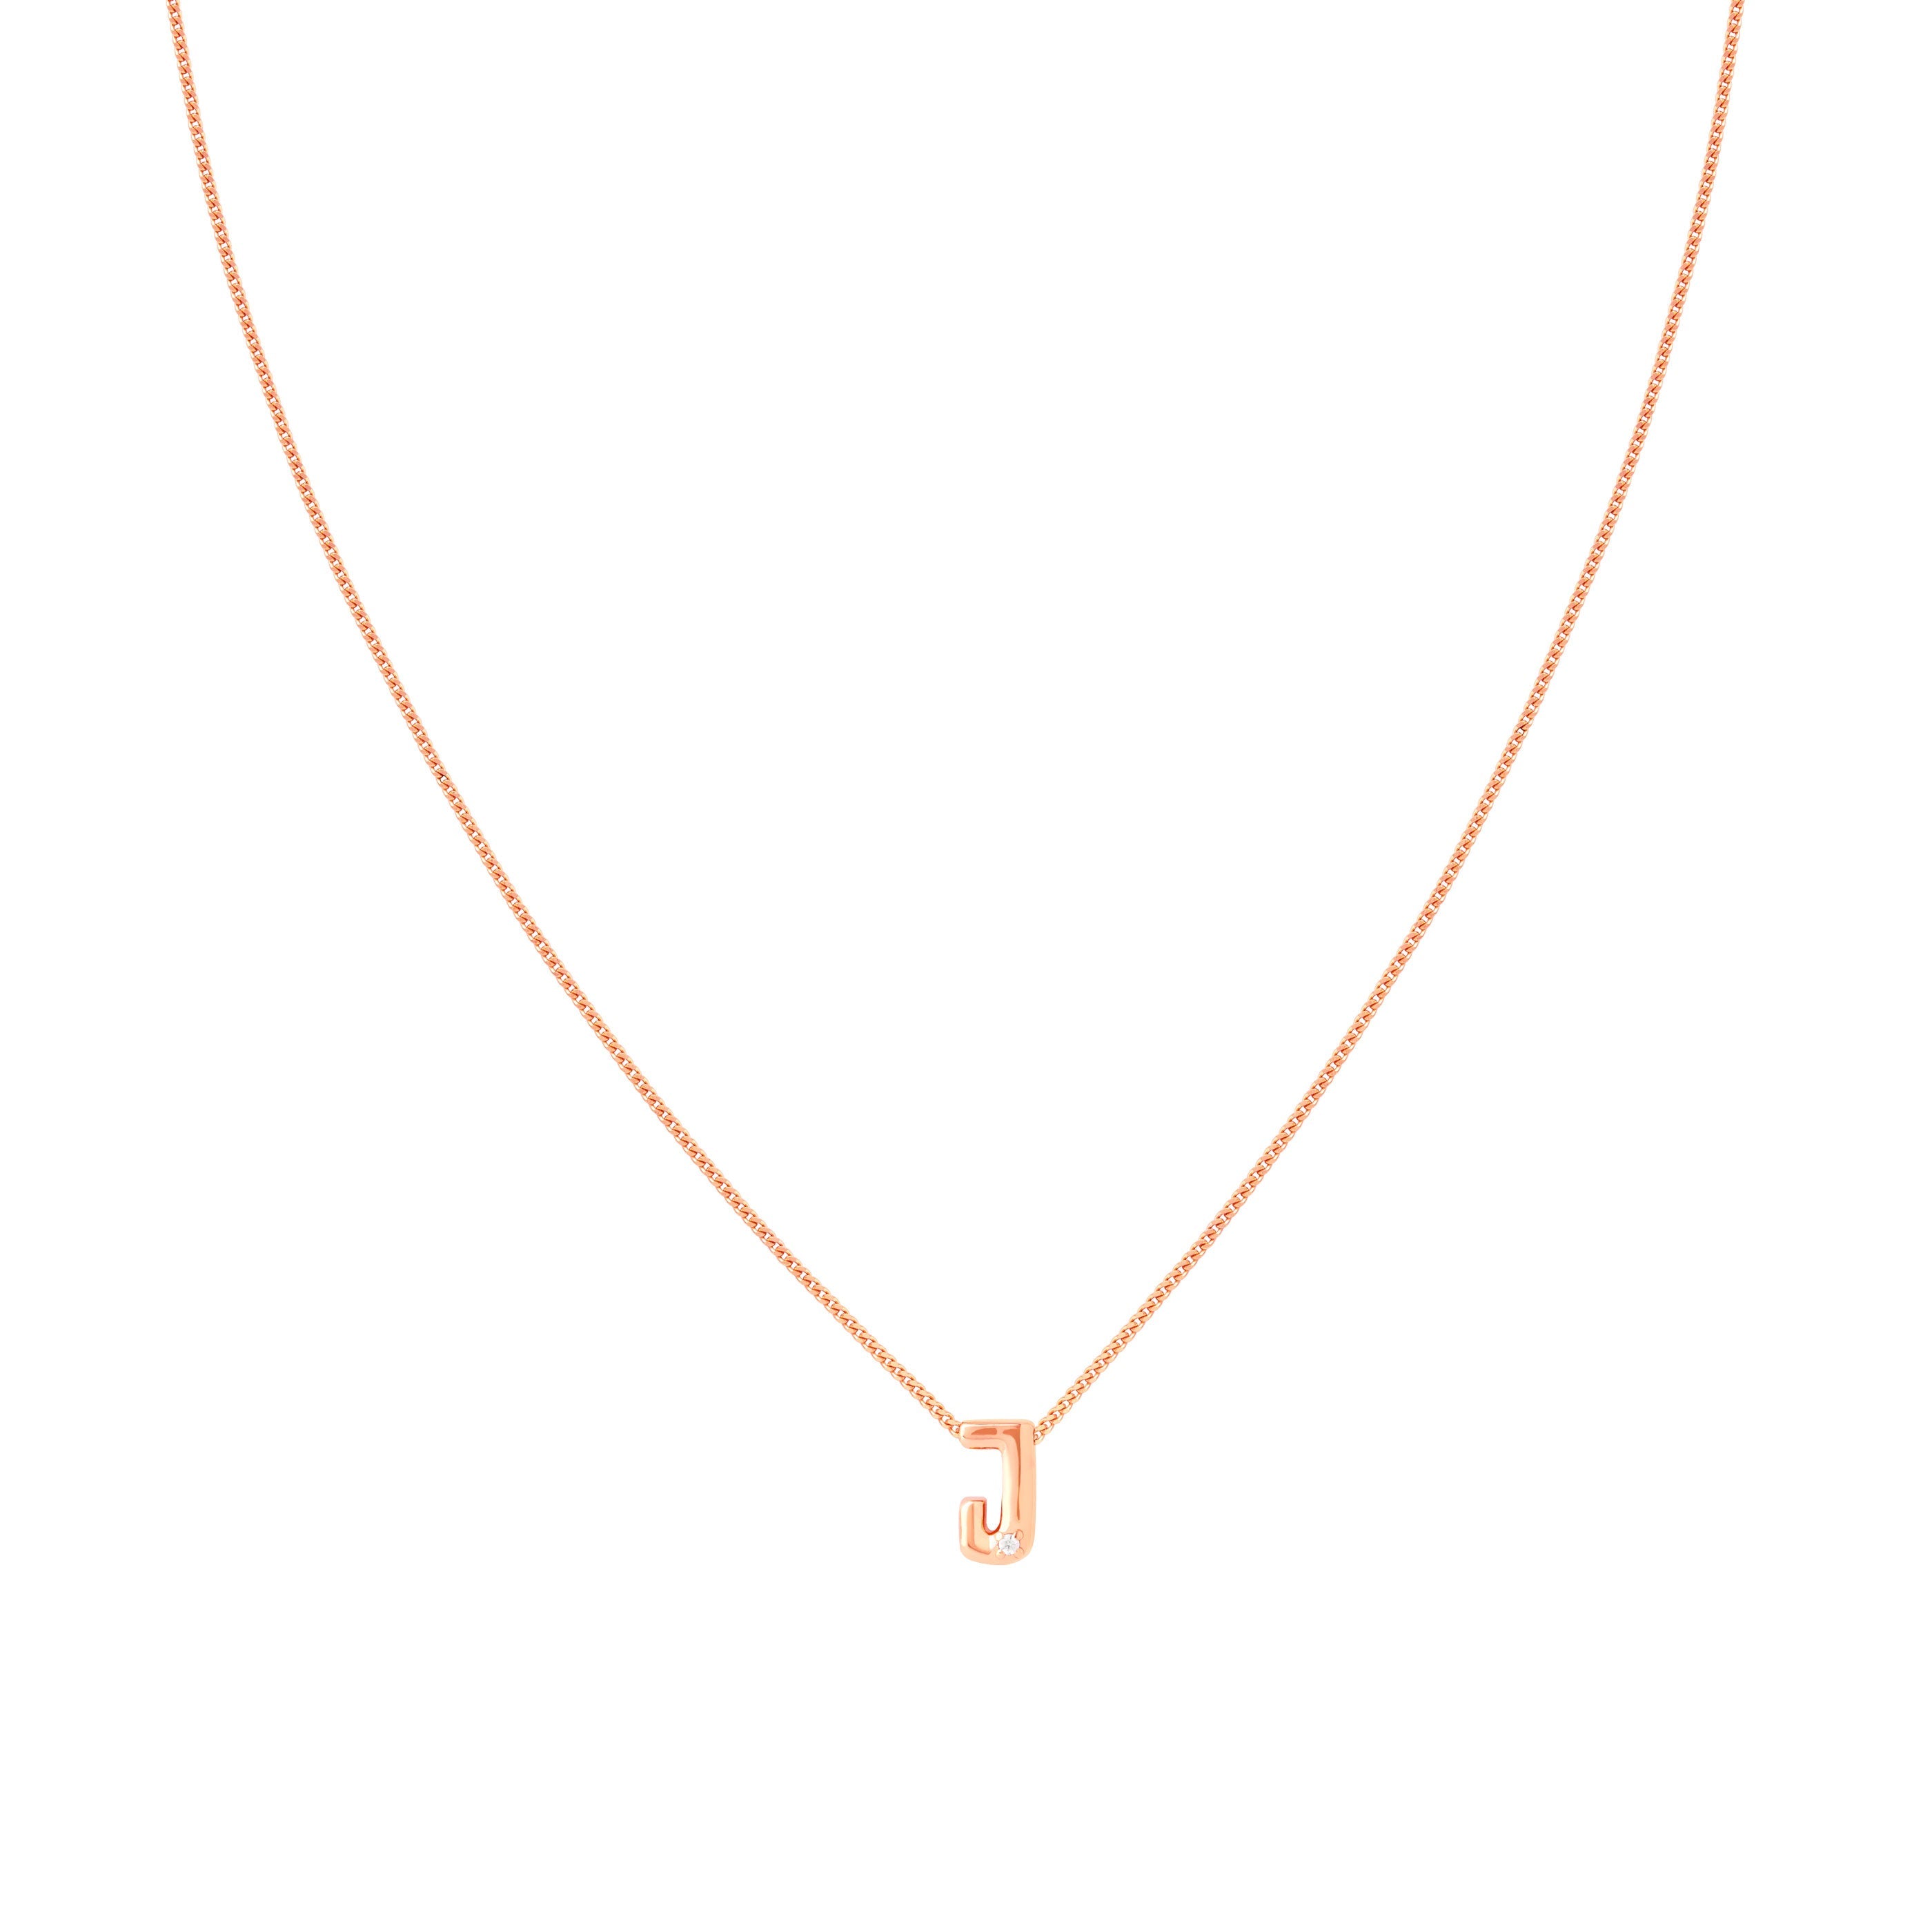 J Initial Pendant Necklace in Rose Gold